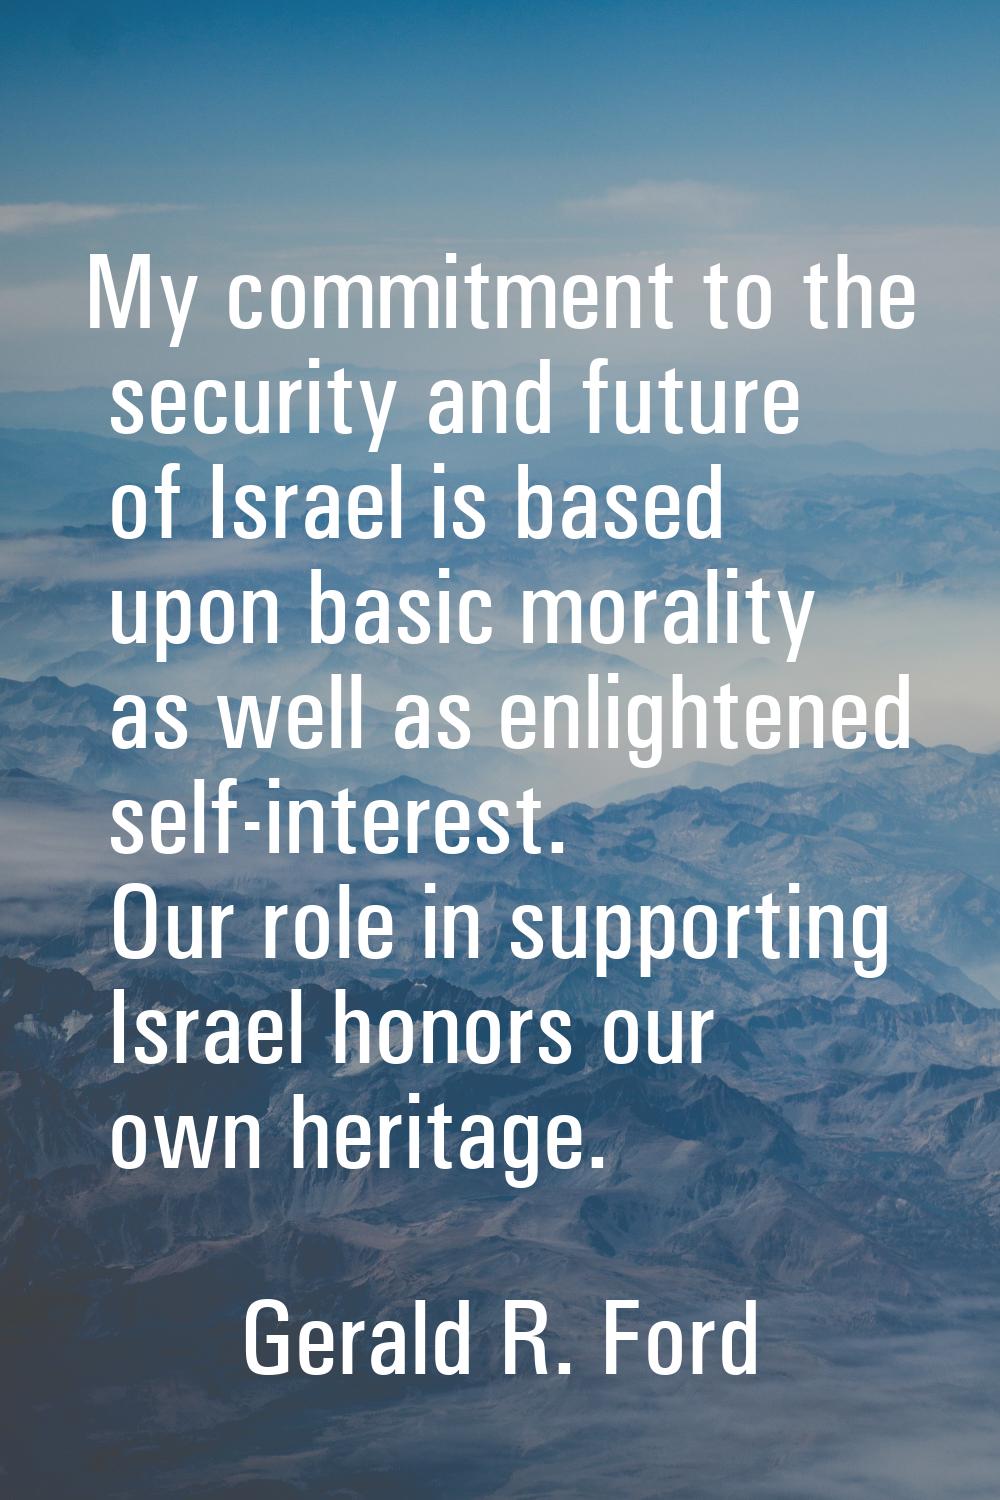 My commitment to the security and future of Israel is based upon basic morality as well as enlighte